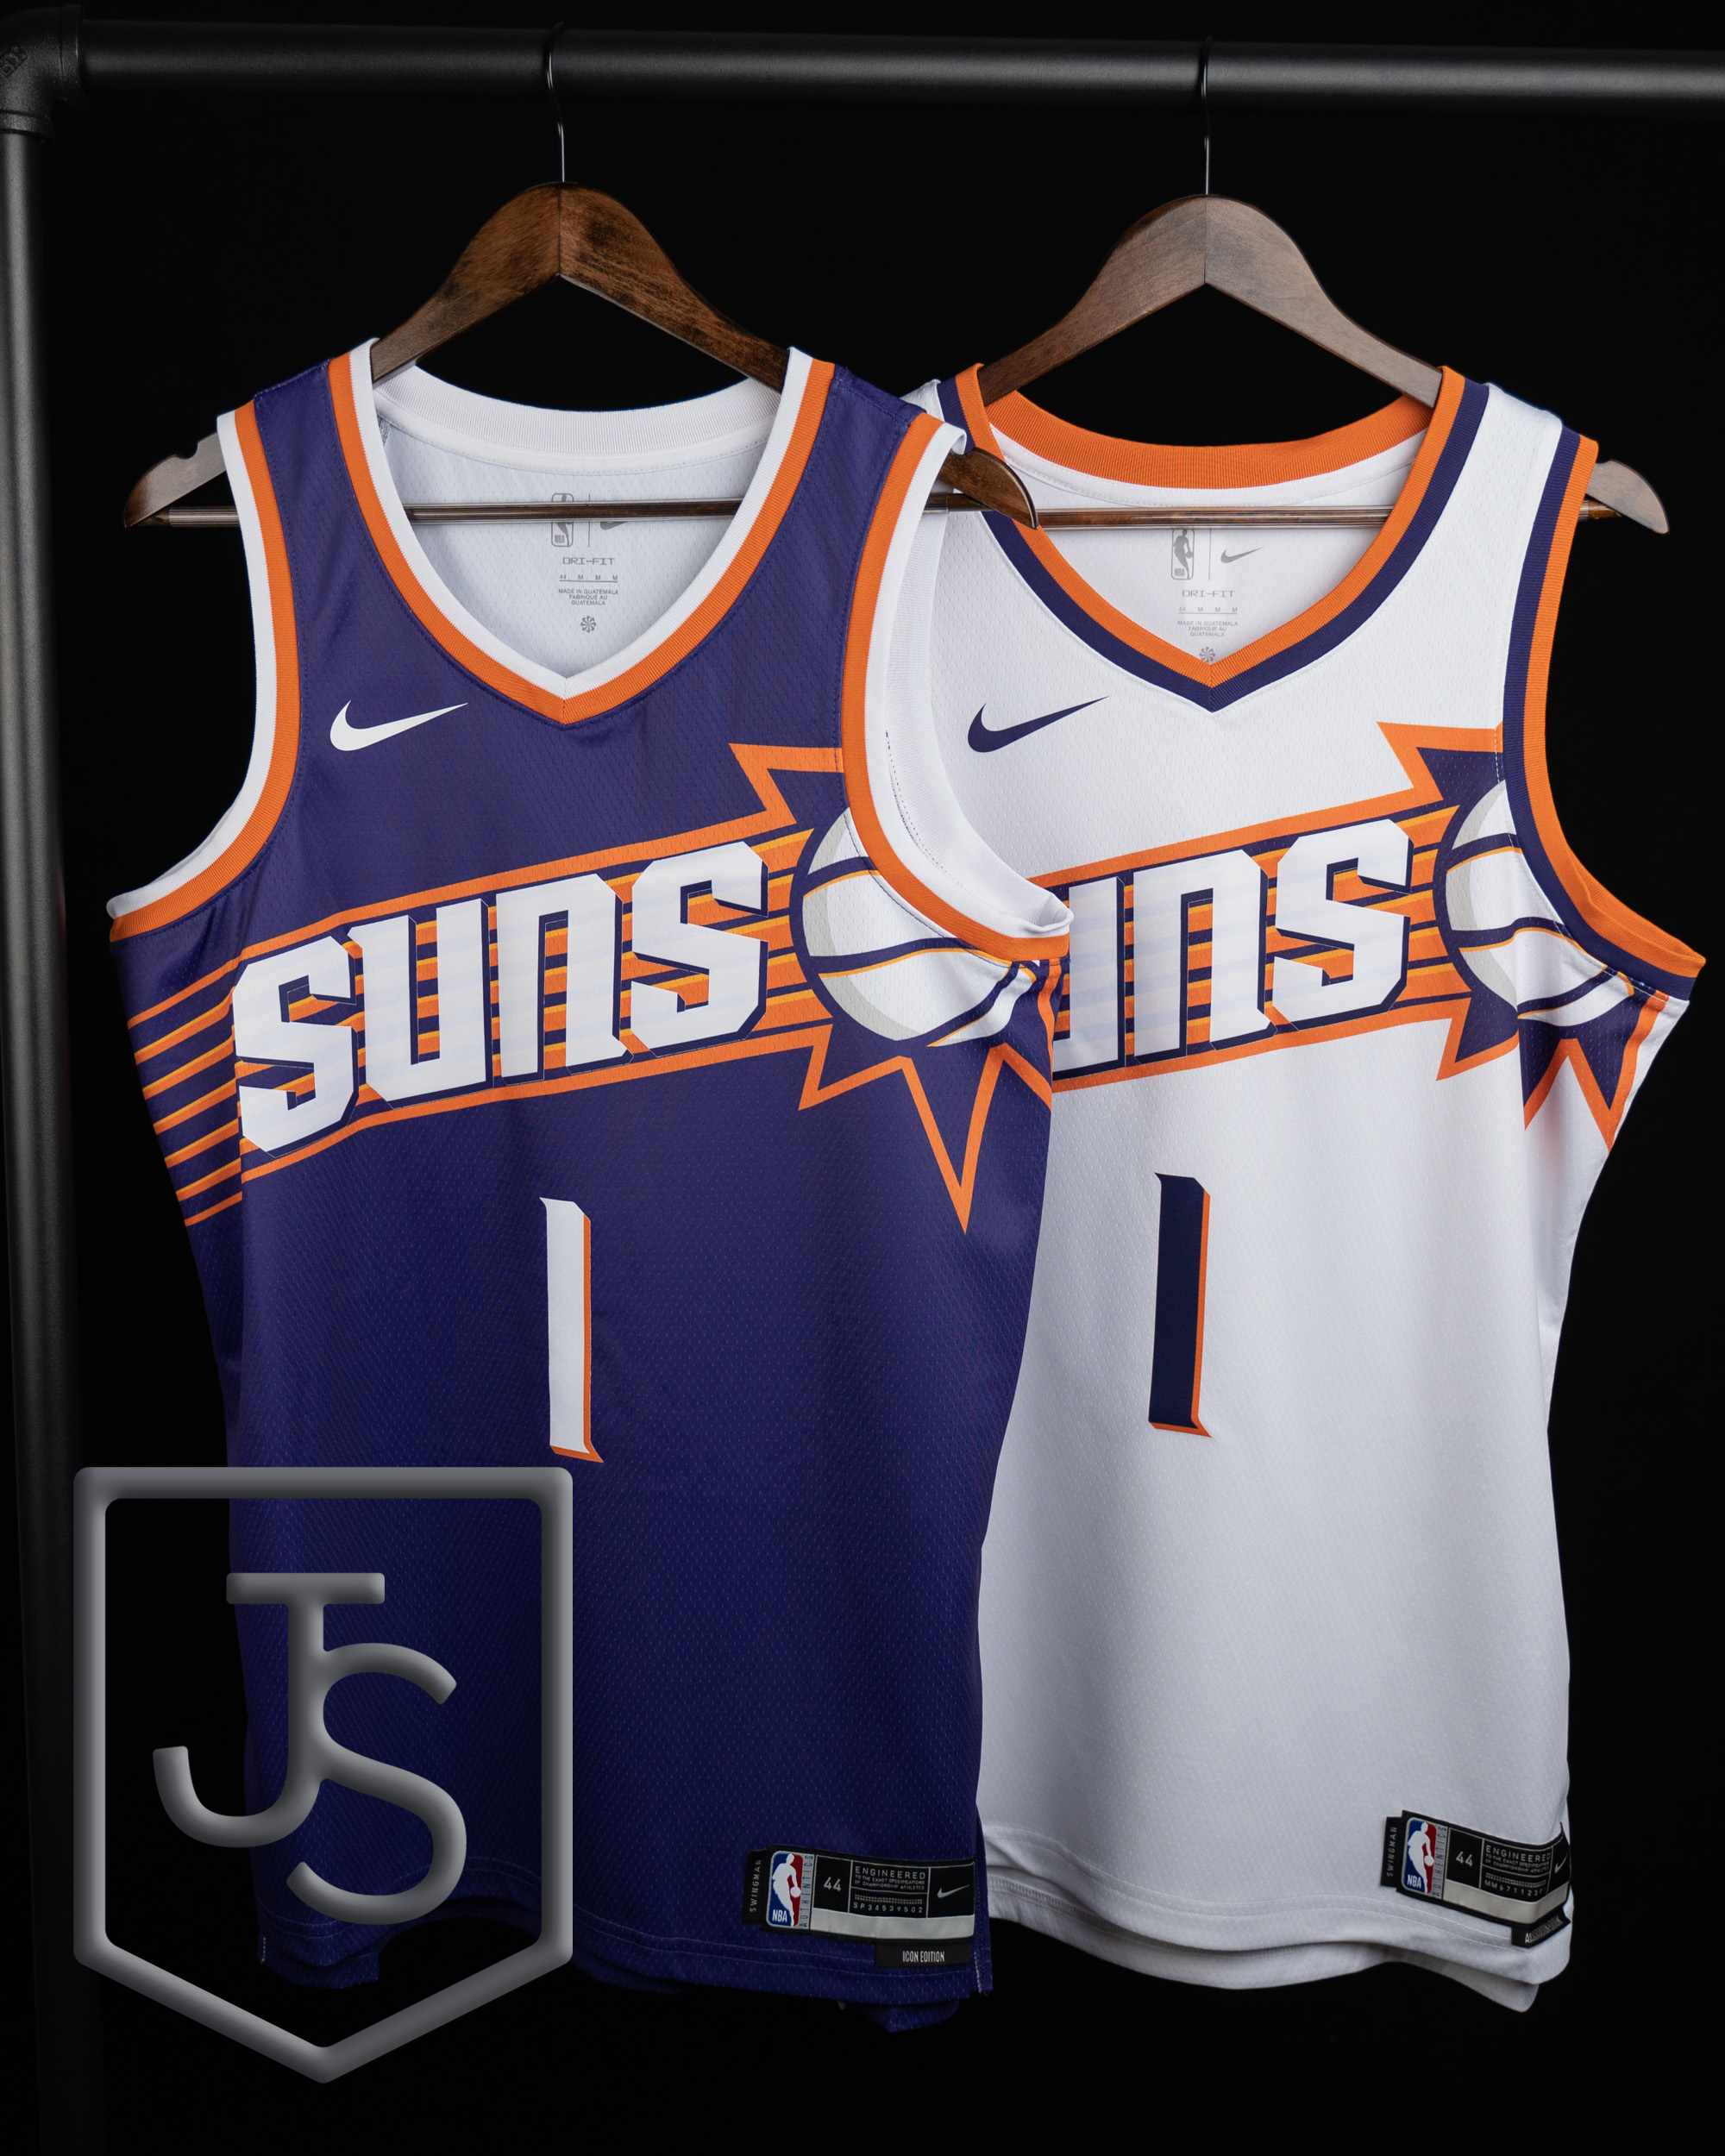 Just Sports on X: New Phoenix Suns Icon and Association jerseys available  now online and at Valley stores today! Get free shipping on these jerseys  and more now through 8/3 using code